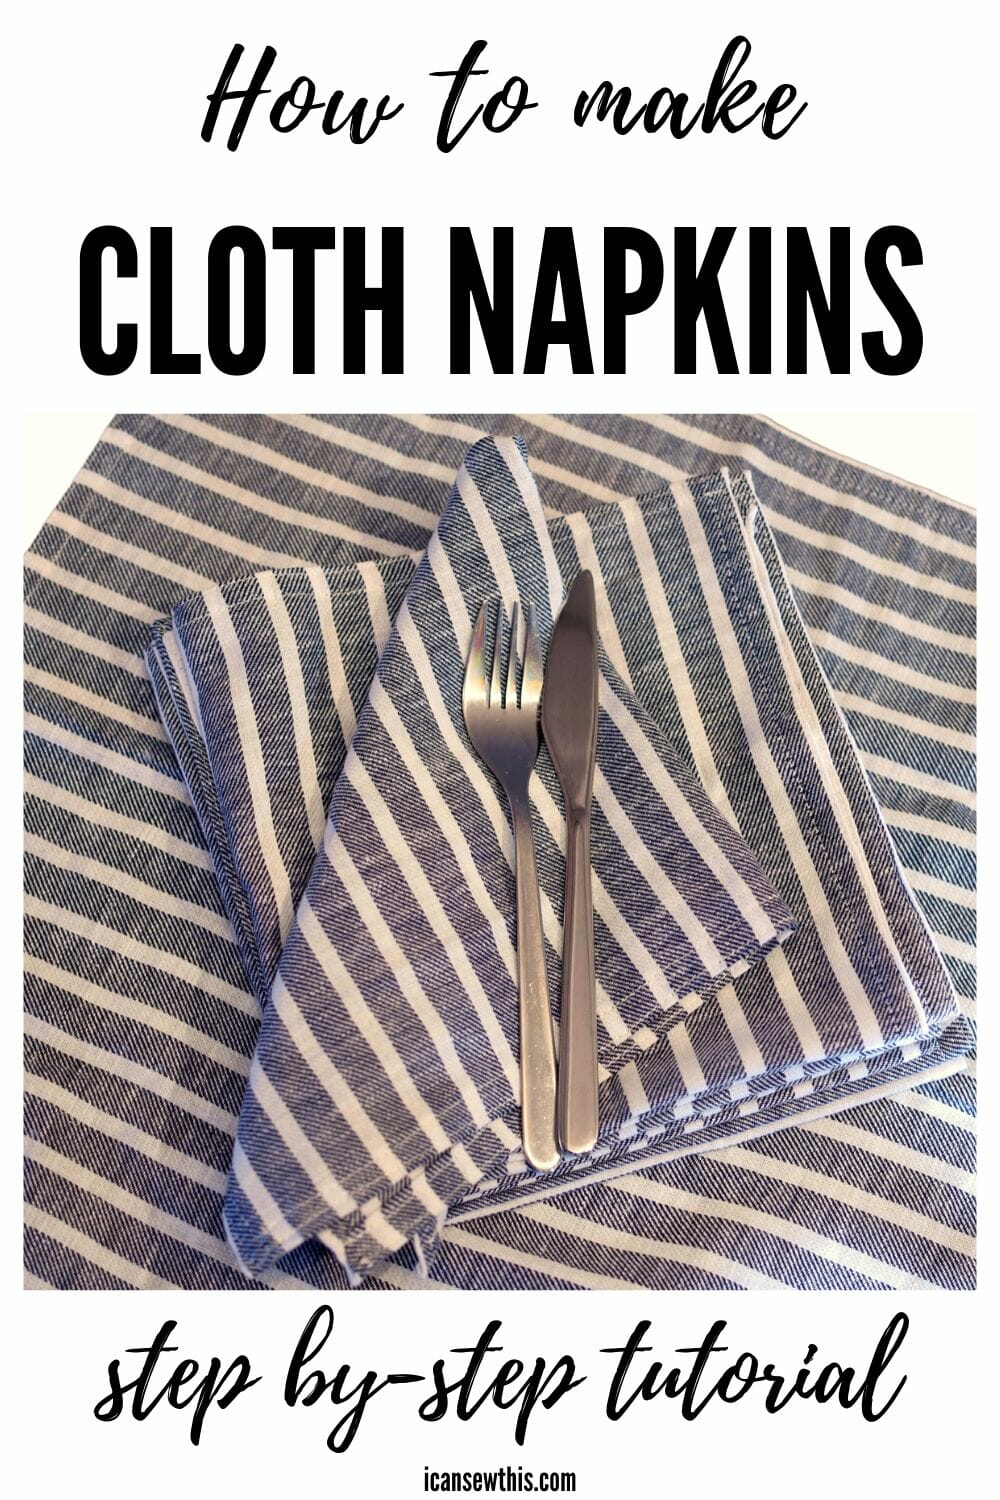 https://static.icansewthis.com/2020/04/how-to-make-cloth-napkins-tutorial-easy.jpg